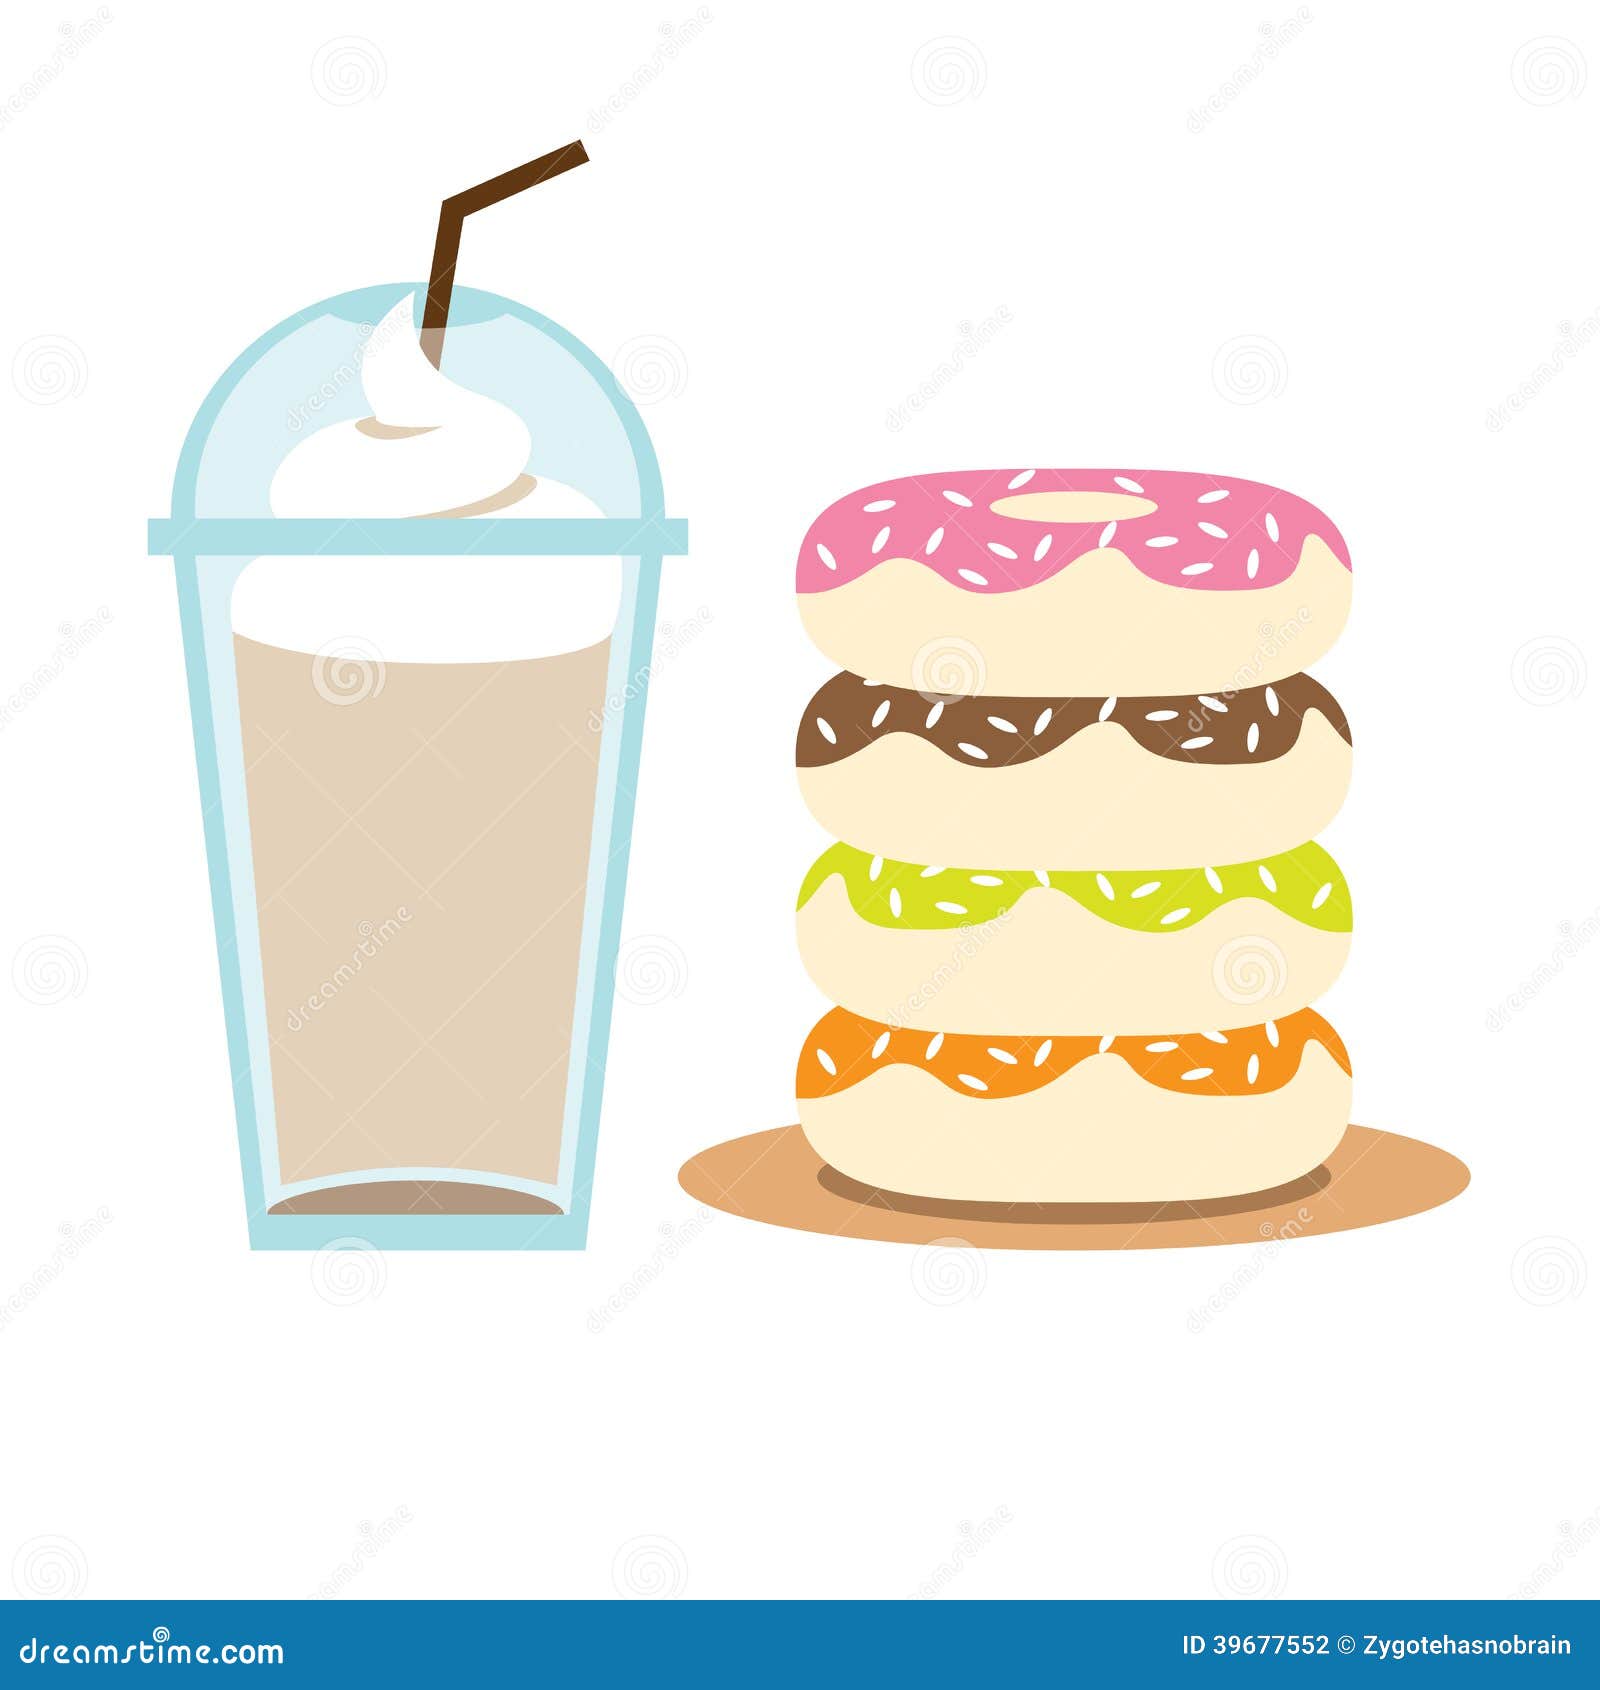 free clipart coffee and donuts - photo #26